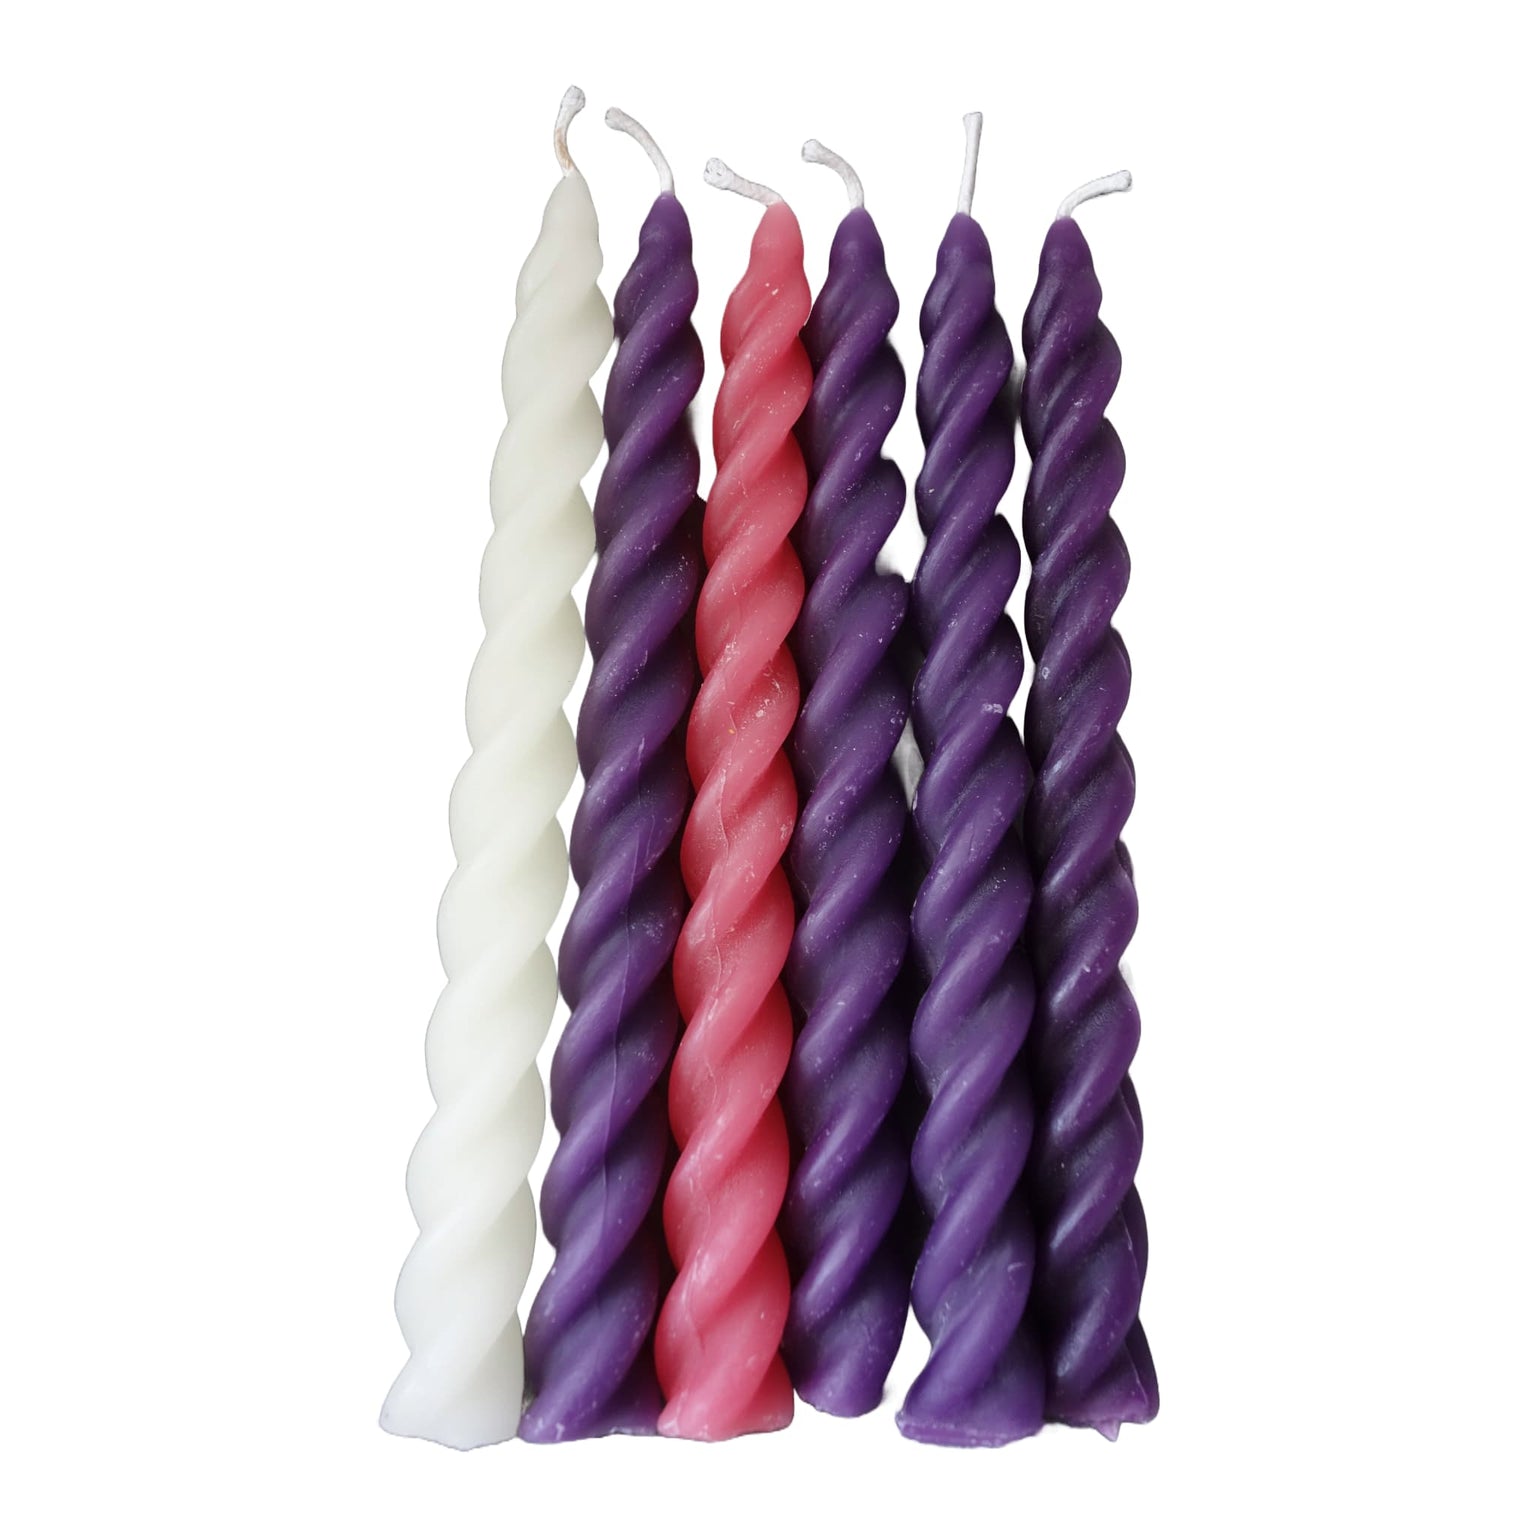 Advent candles pure beeswax twisted spiral candles 7.25 inches